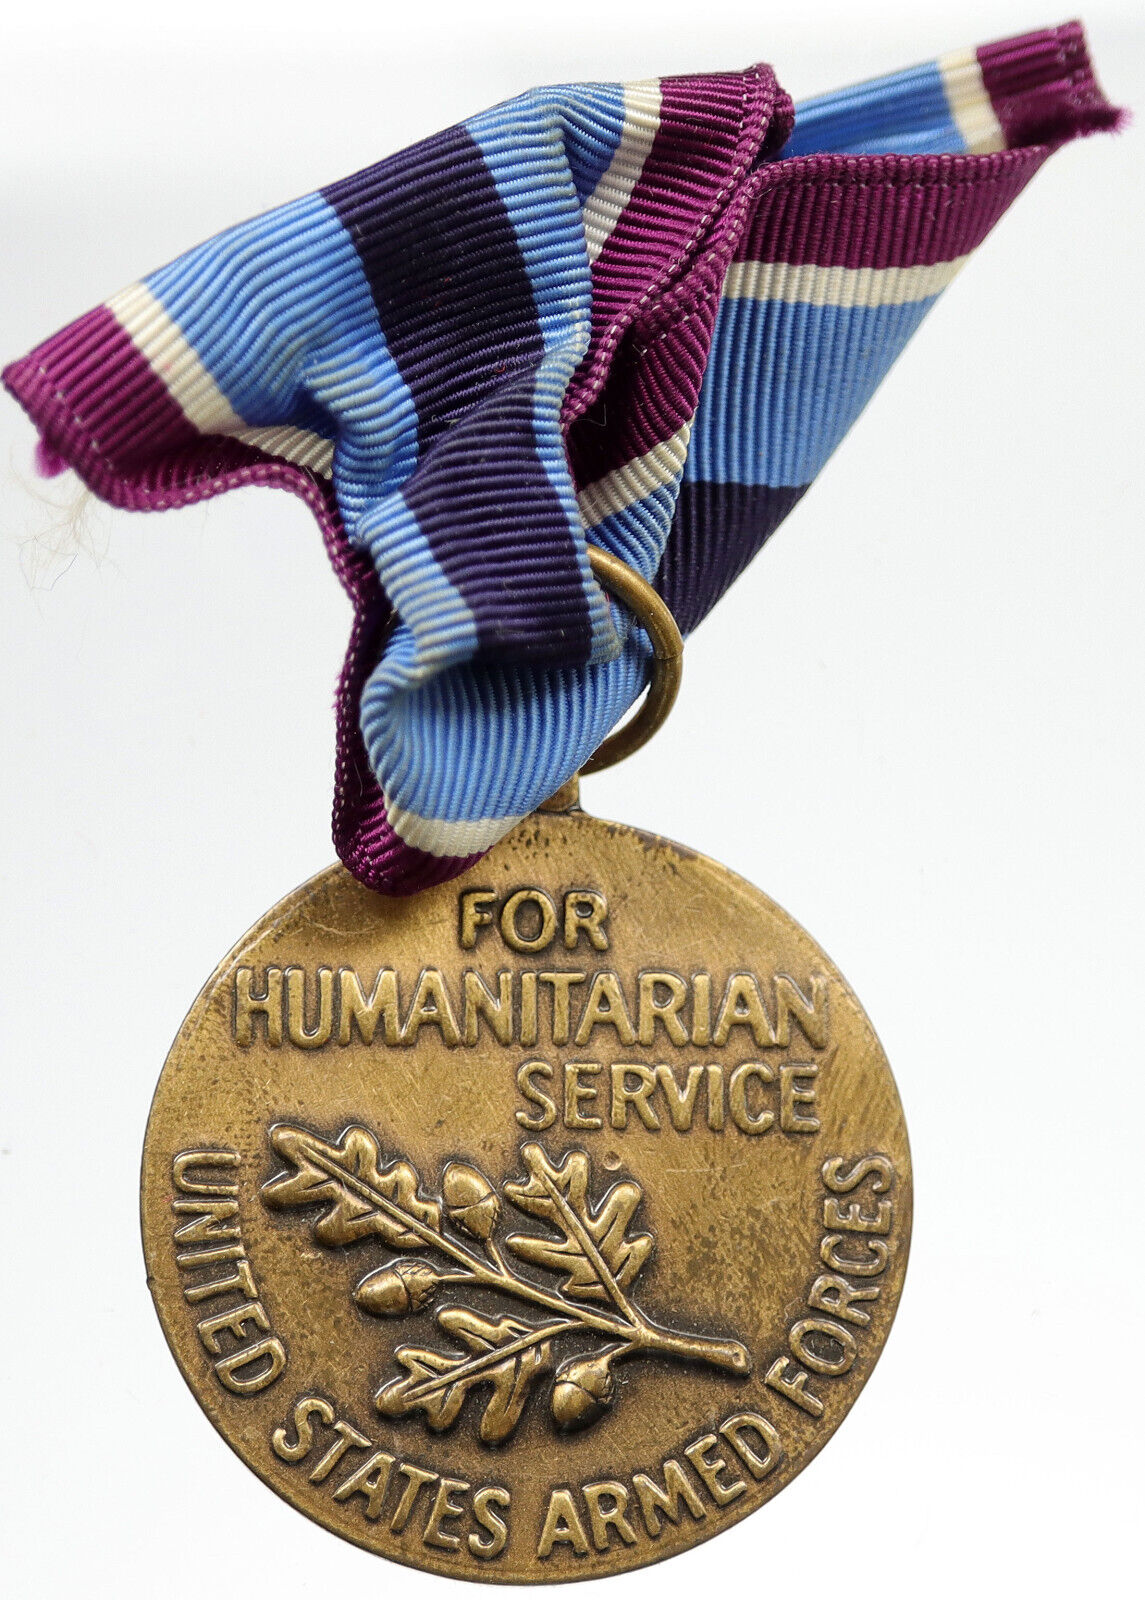 1970s-1990s UNITED STATES US Armed Forces HUMANITARIAN SERVICE Medal i119726